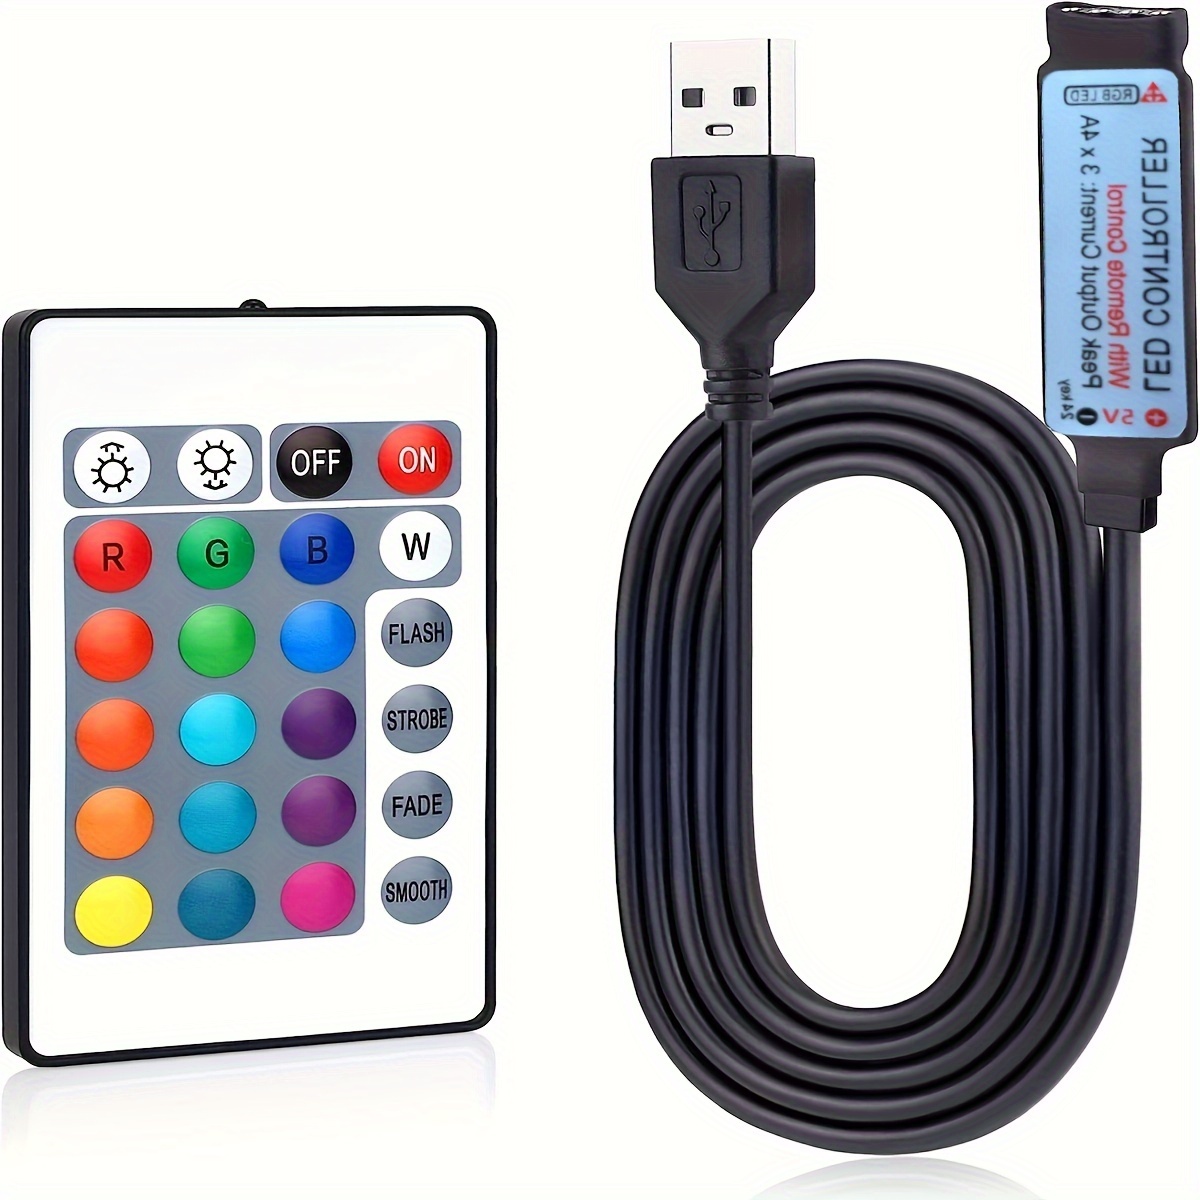 

1pc/2pcs Usb Led Controller, Used For Remote Control Of Smd 5050 2835 3528 4-pin Rgb Led Light Strips